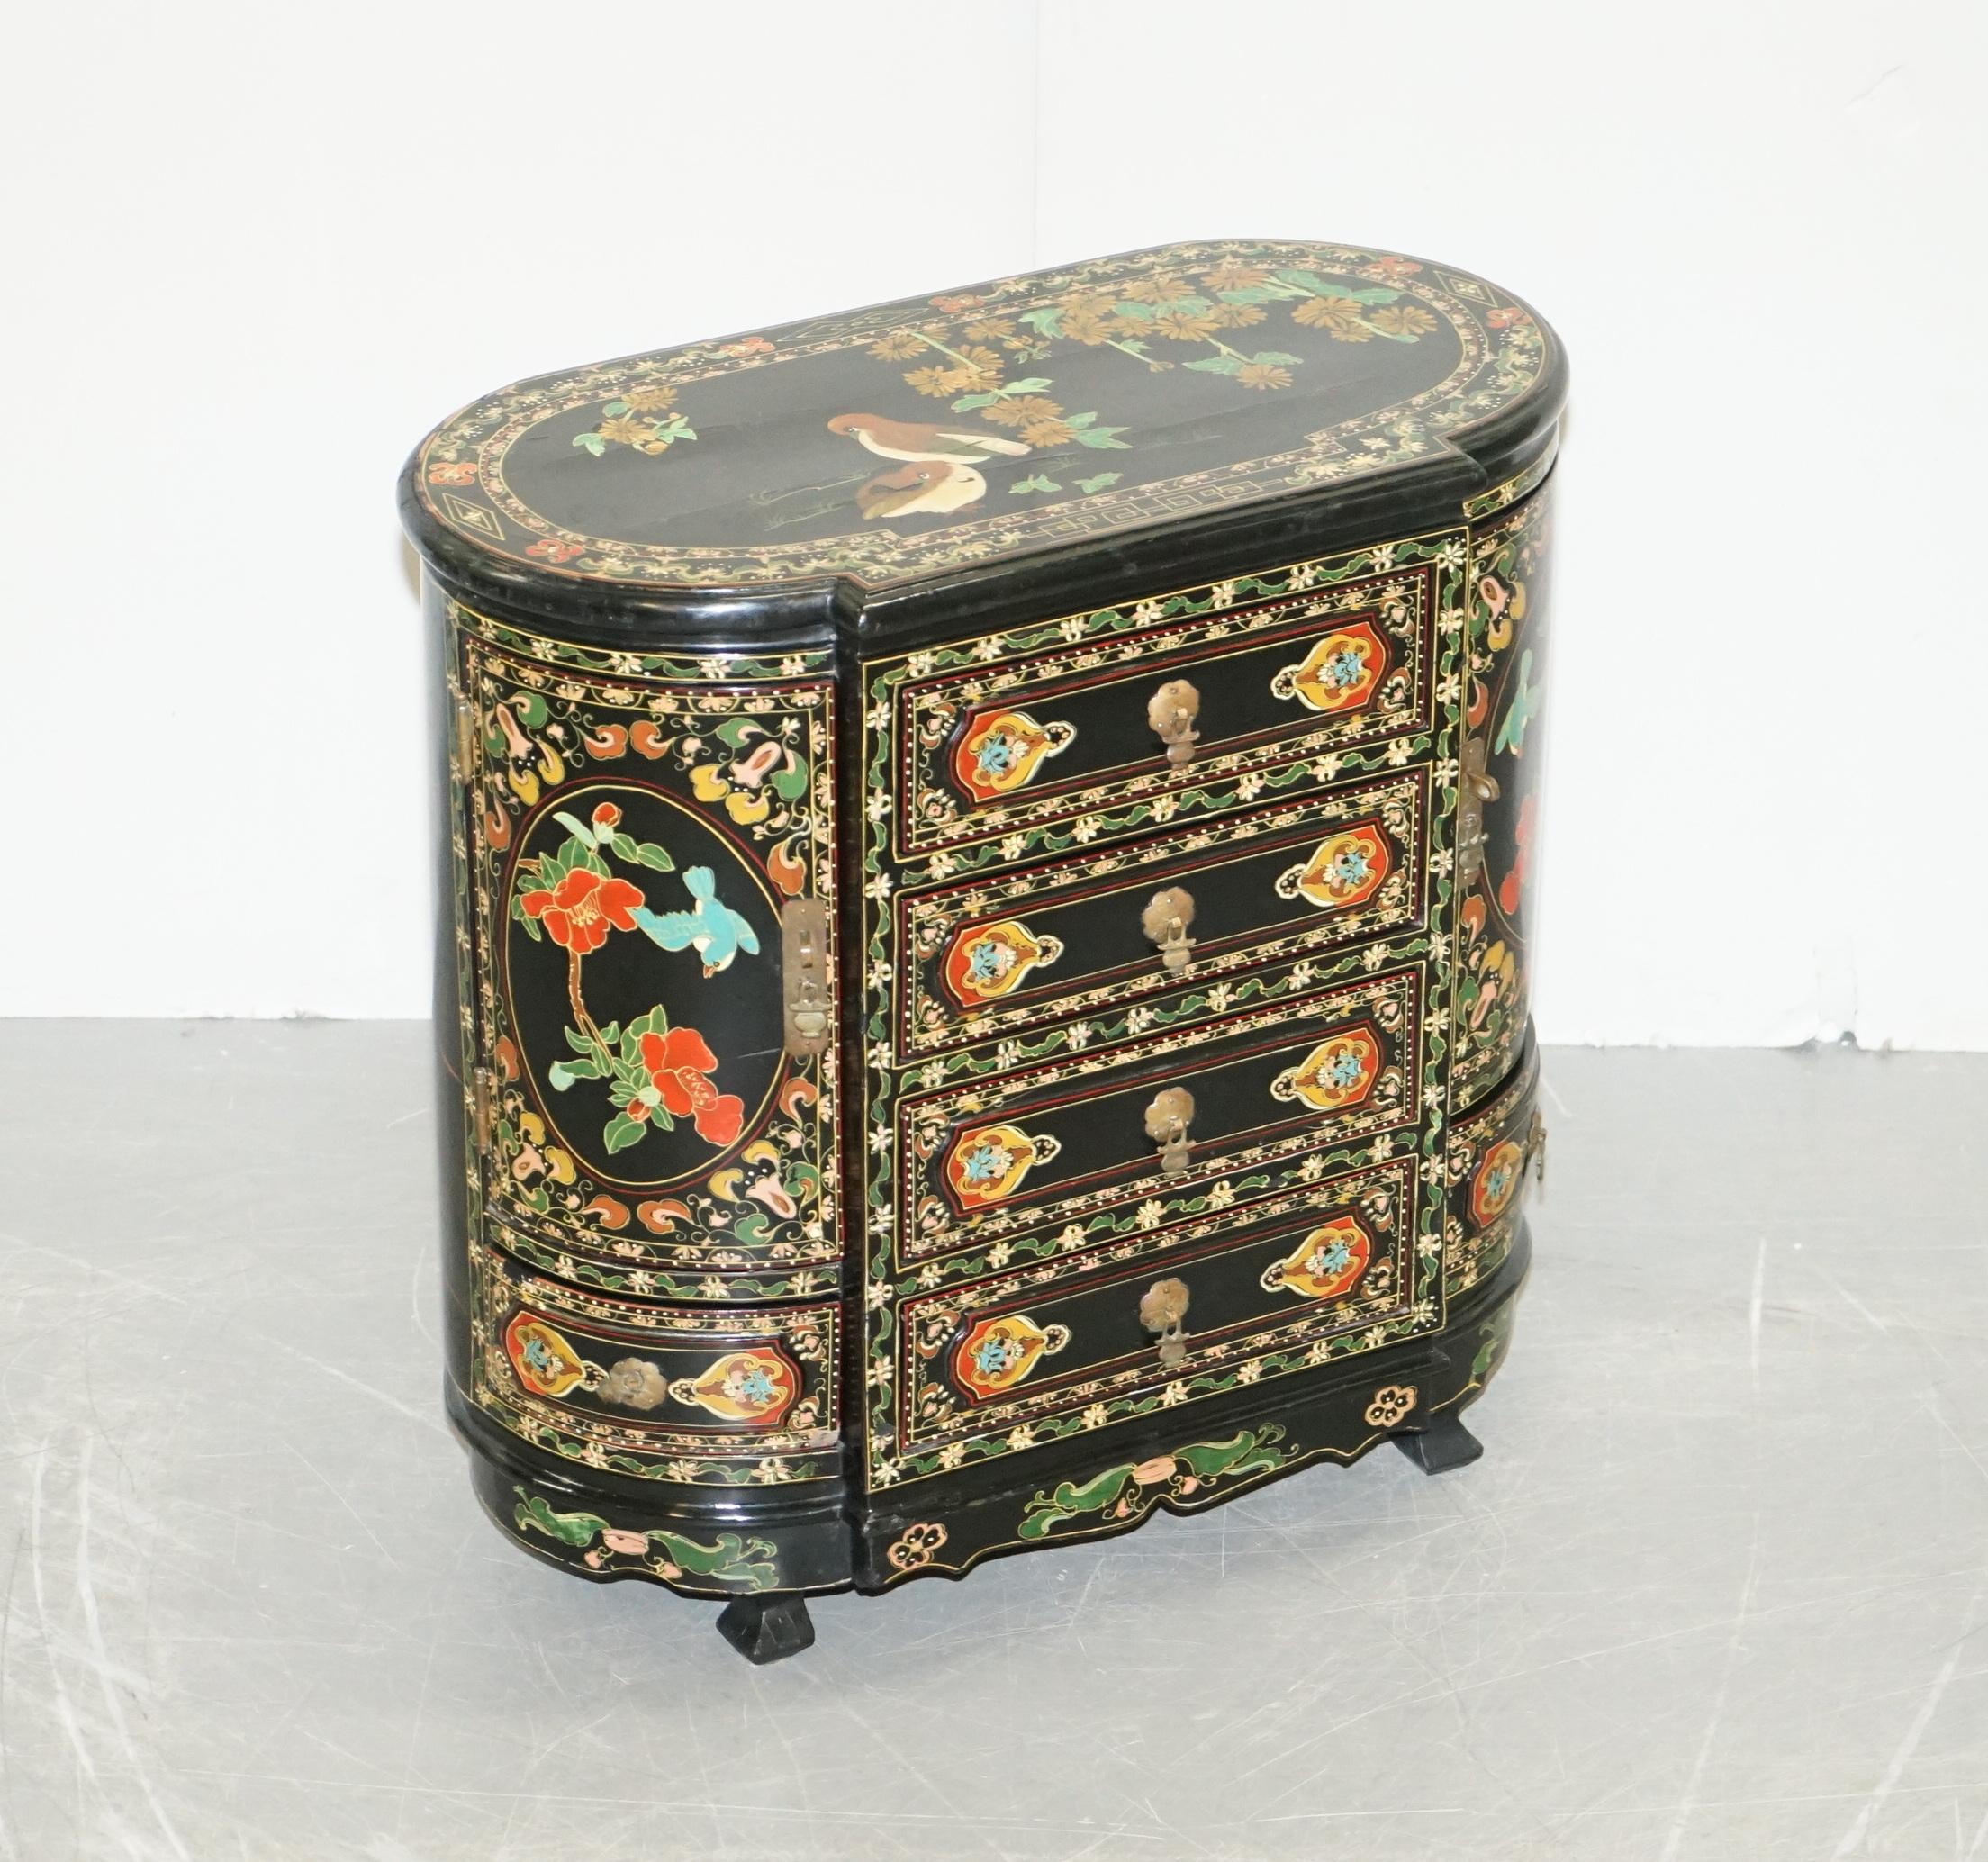 We are delighted to offer this beautiful ornately decorated Chinese Chinoiserie side table cupboard hand painted with birds and flowers

A very well made and decorative side table, it has cupboards and drawers which offer plenty of storage, the